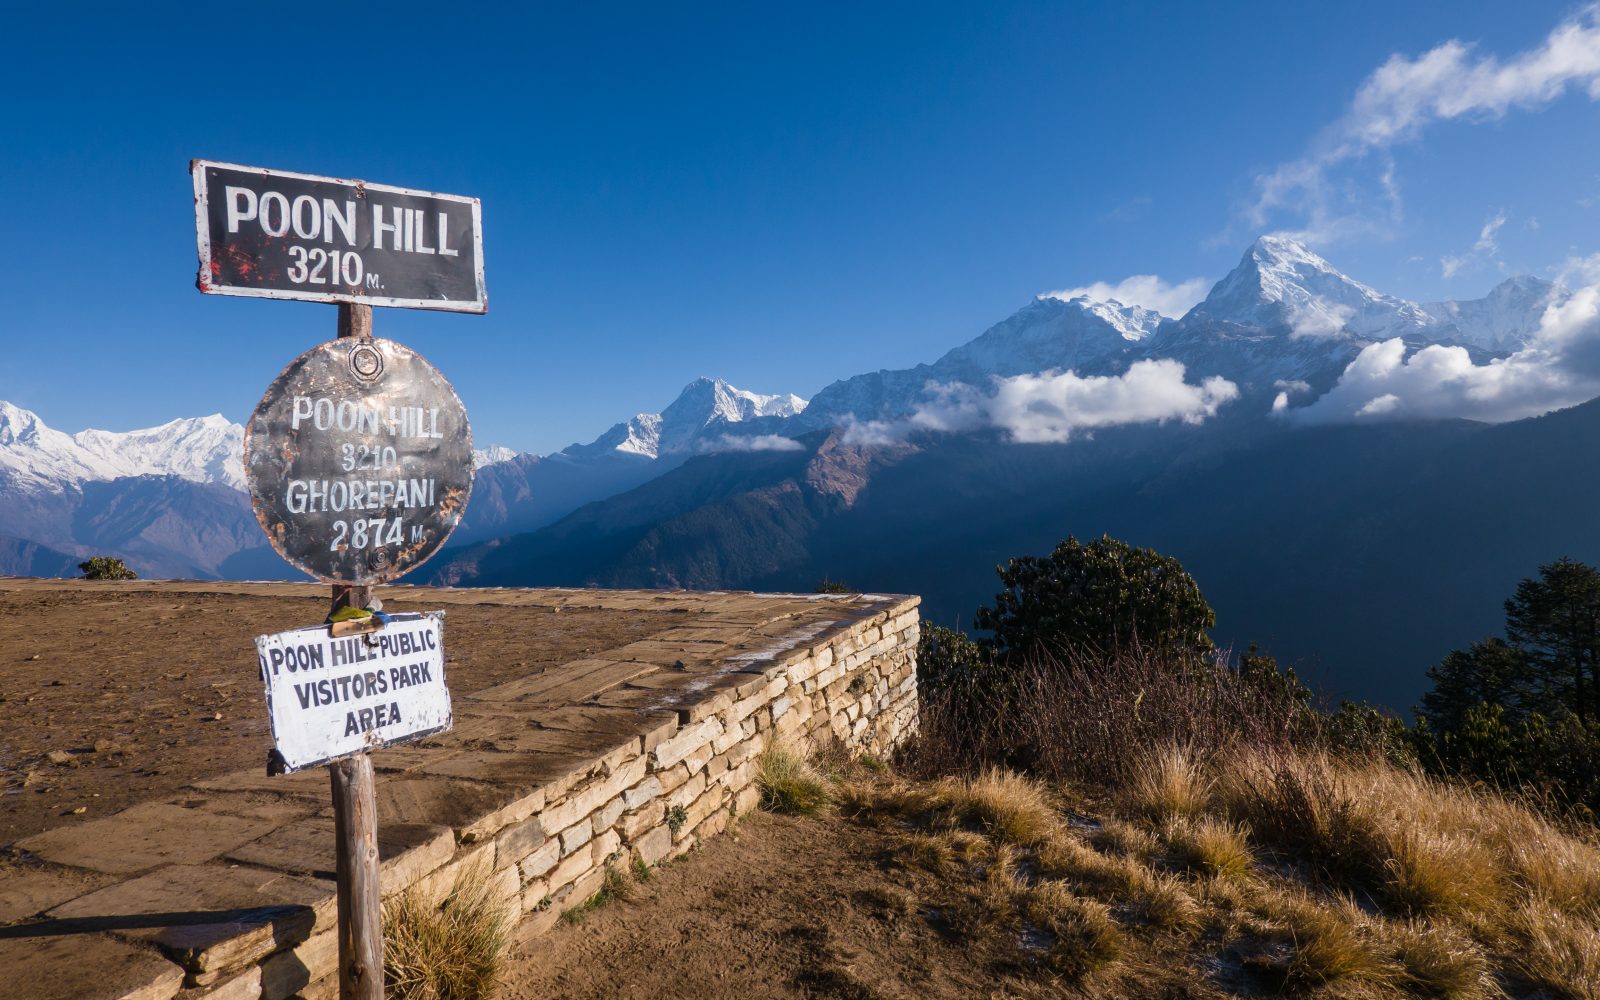 The view from Poon Hill. Annapurna I (8,091m) and Annapurna South